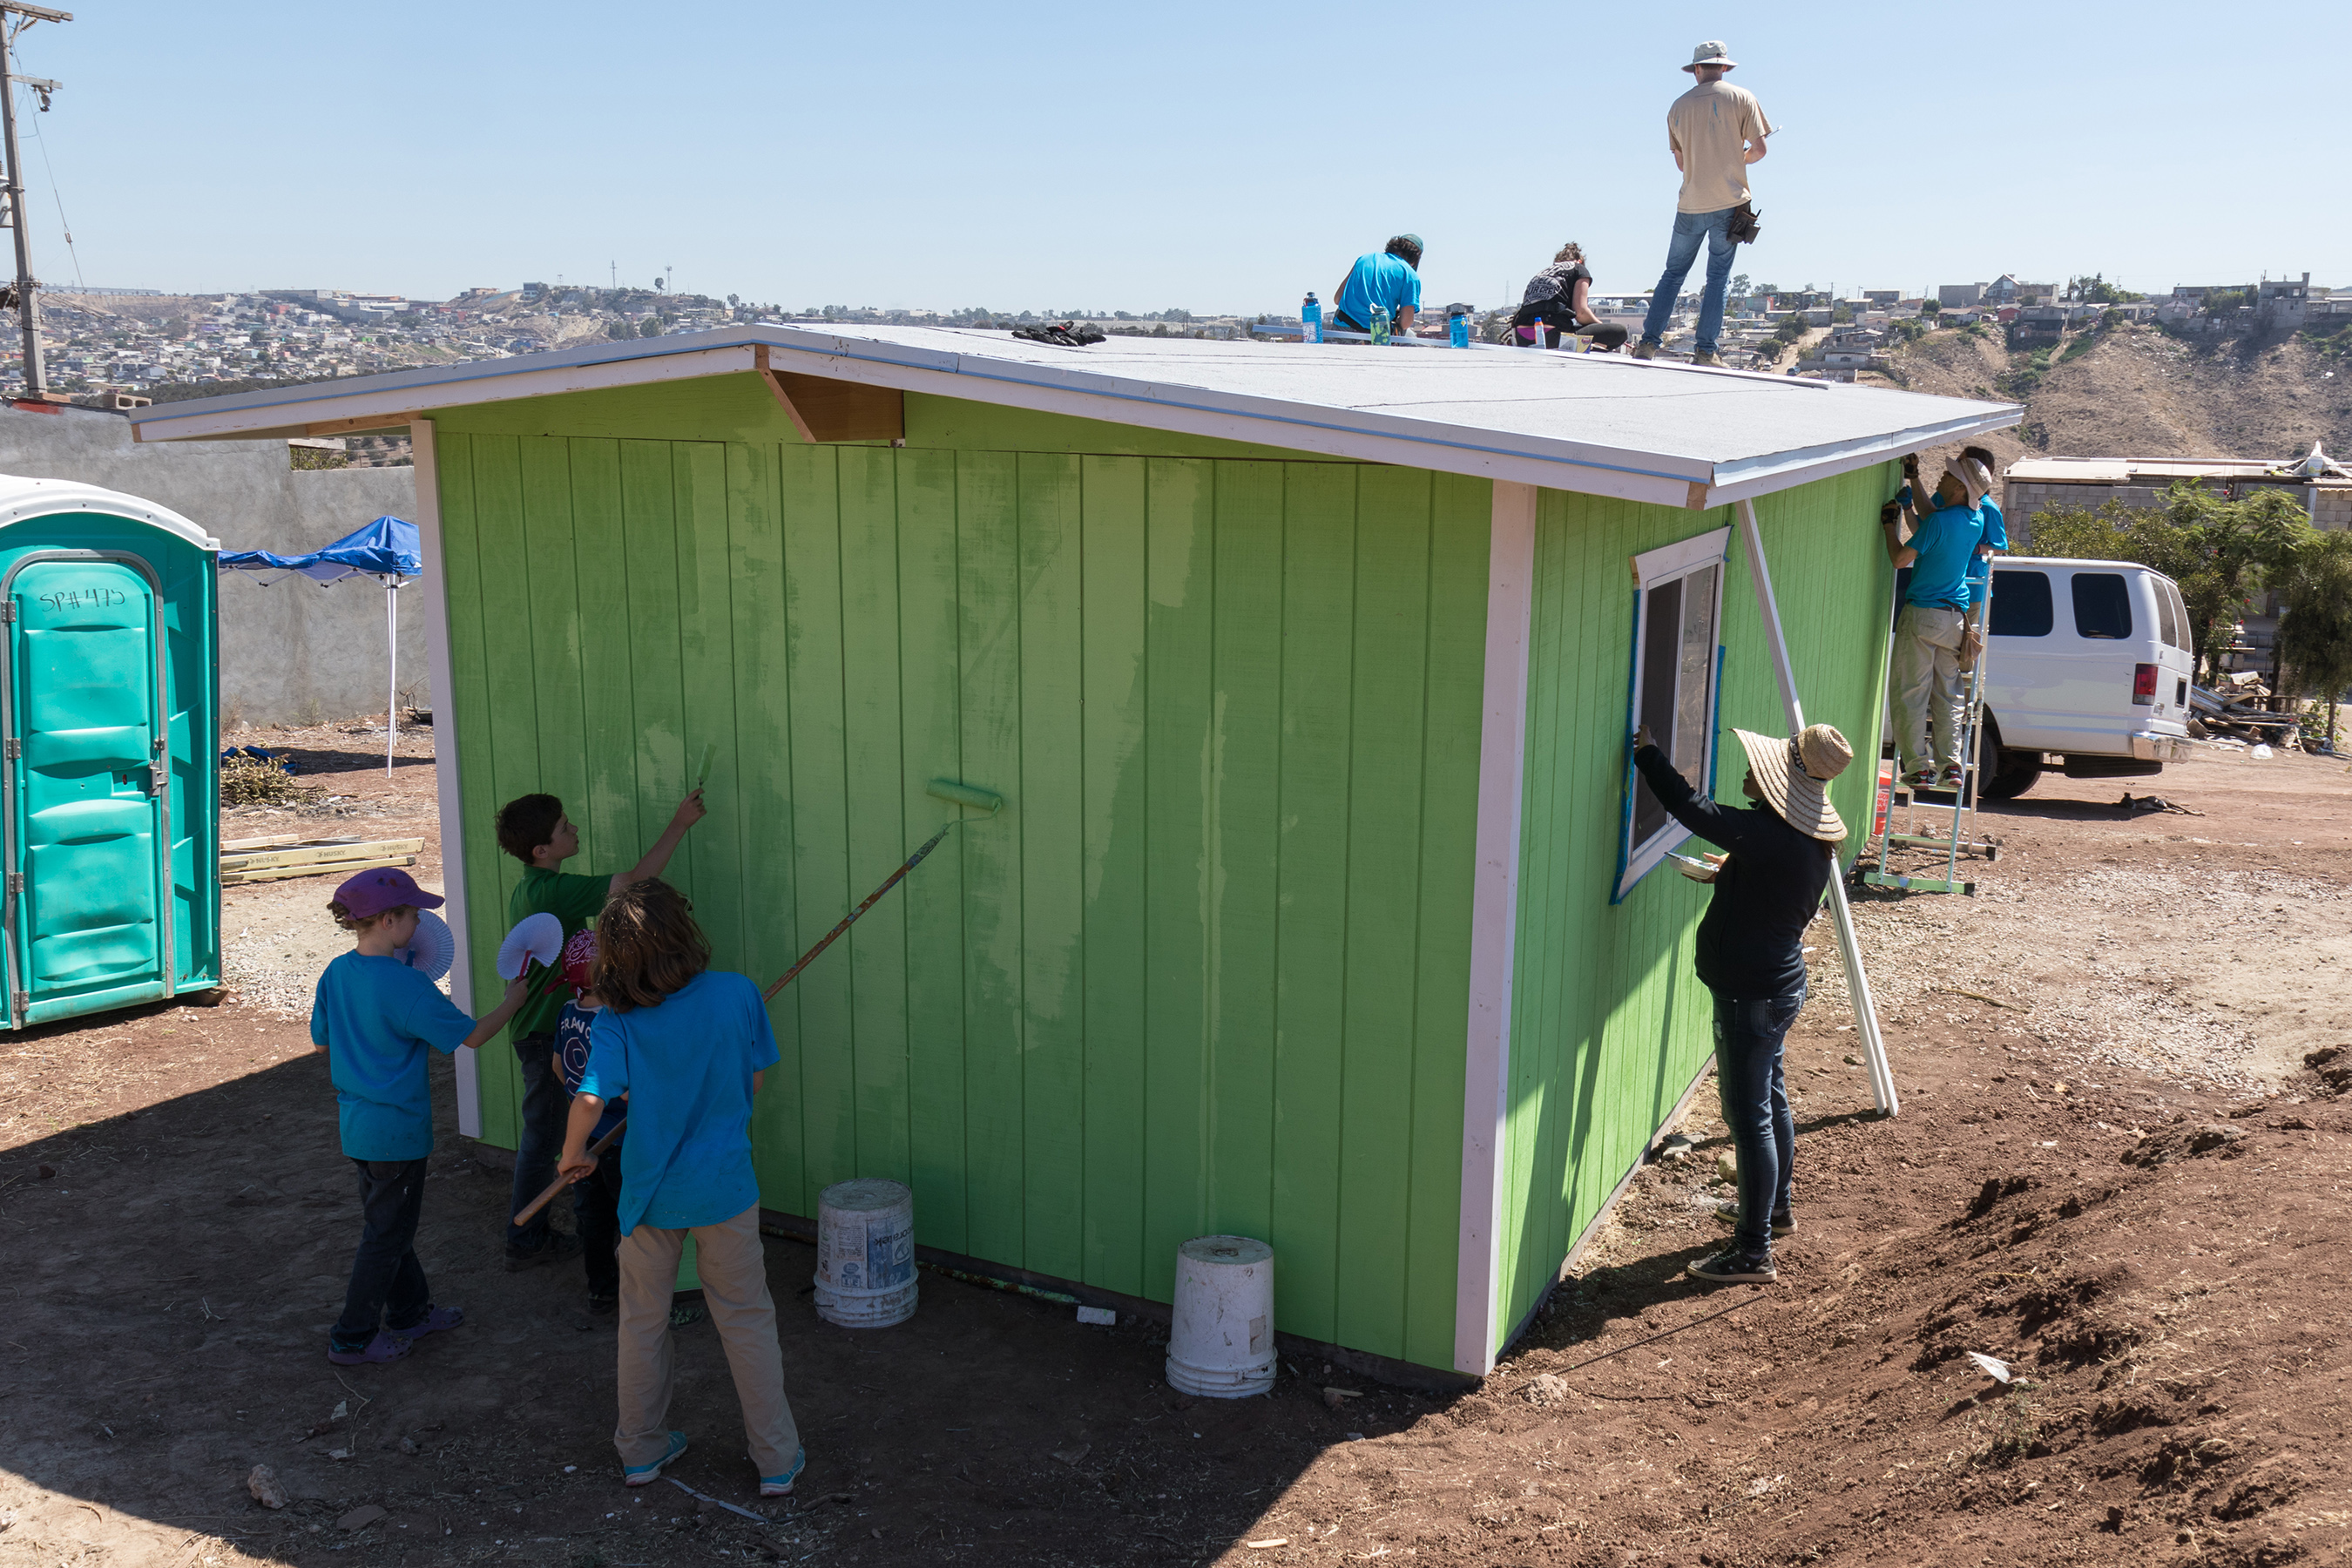 DOXA takes Group to Tijuana for House-Building Trip this Easter